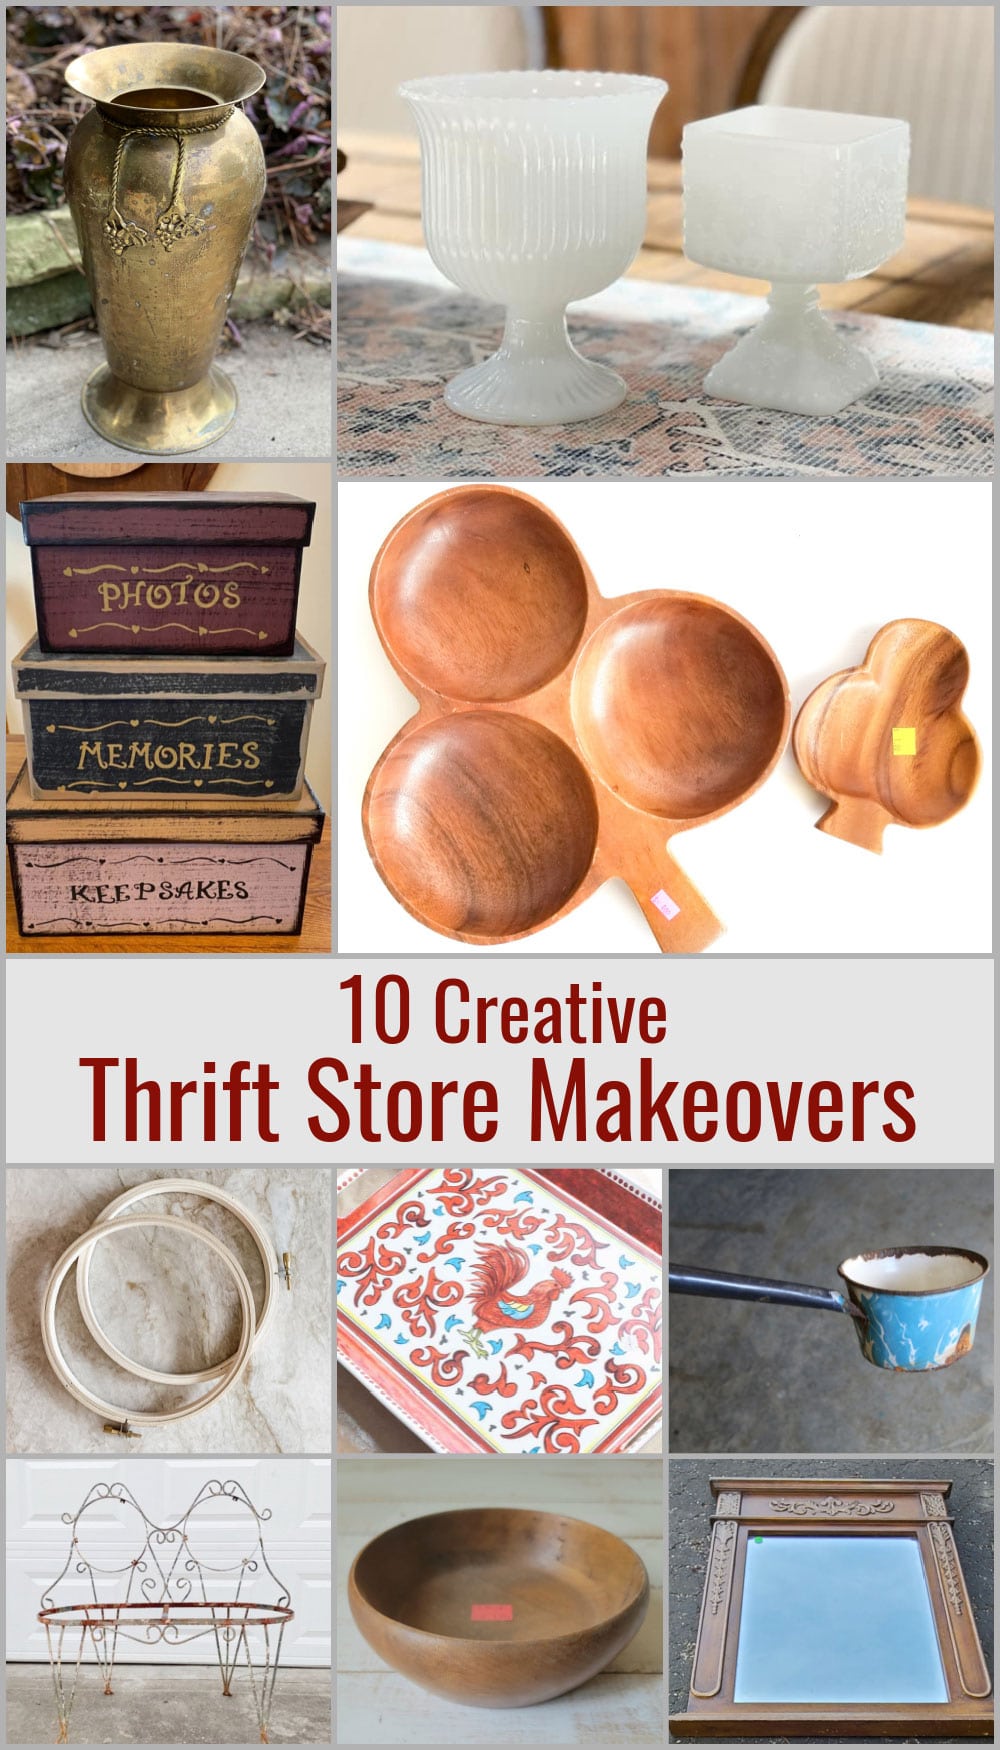 10 thrift store makeovers taking common items found in the thrift store and updating them.